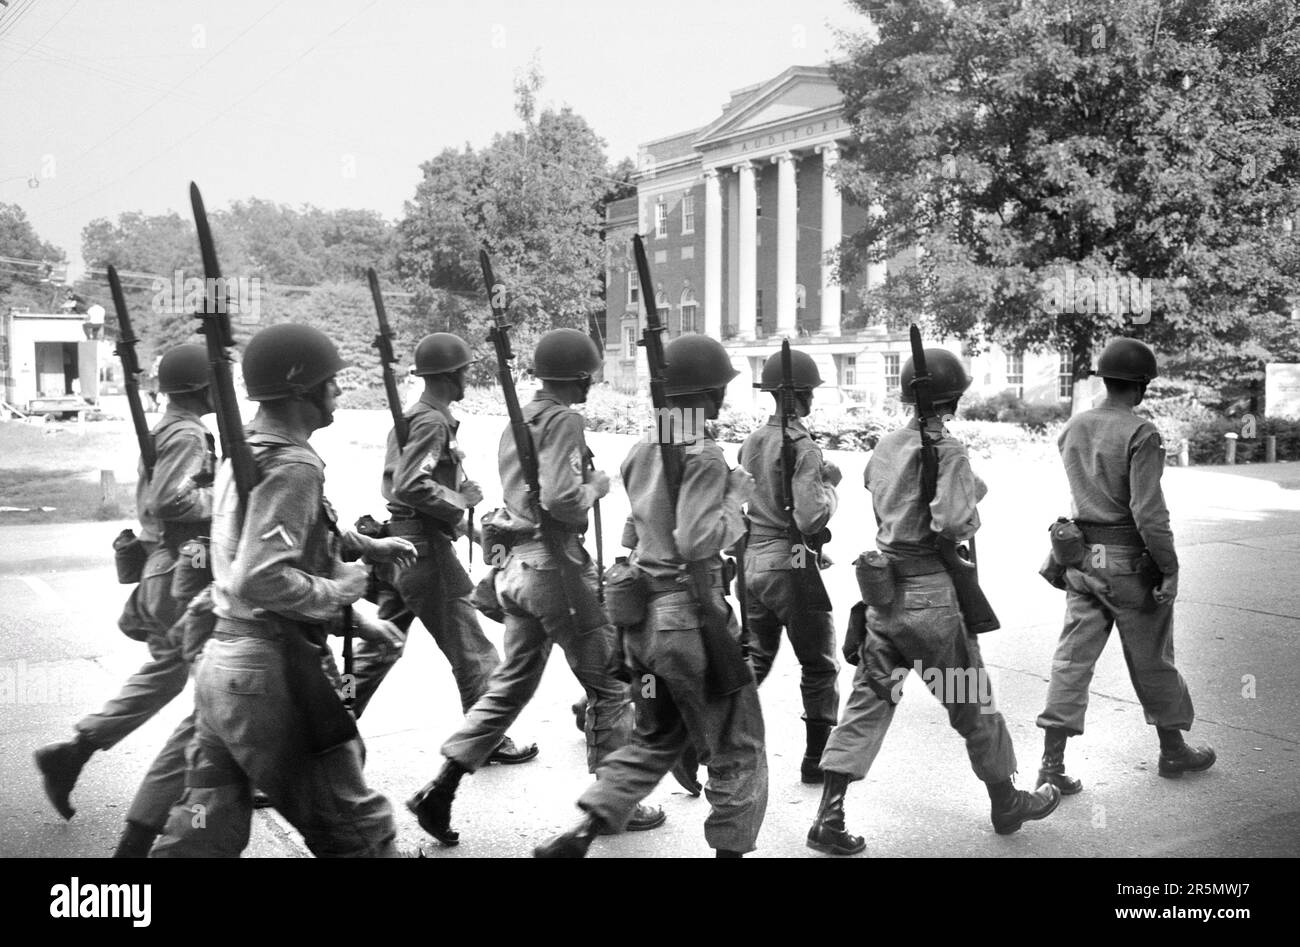 Federalized National Guard Troops on campus when African Americans Vivian Malone and James Hood registered for classed, University of Alabama, Tuscaloosa, Alabama, USA, Warren K. Leffler, U.S. News & World Report Magazine Photograph Collection, June 11, 1963 Stock Photo